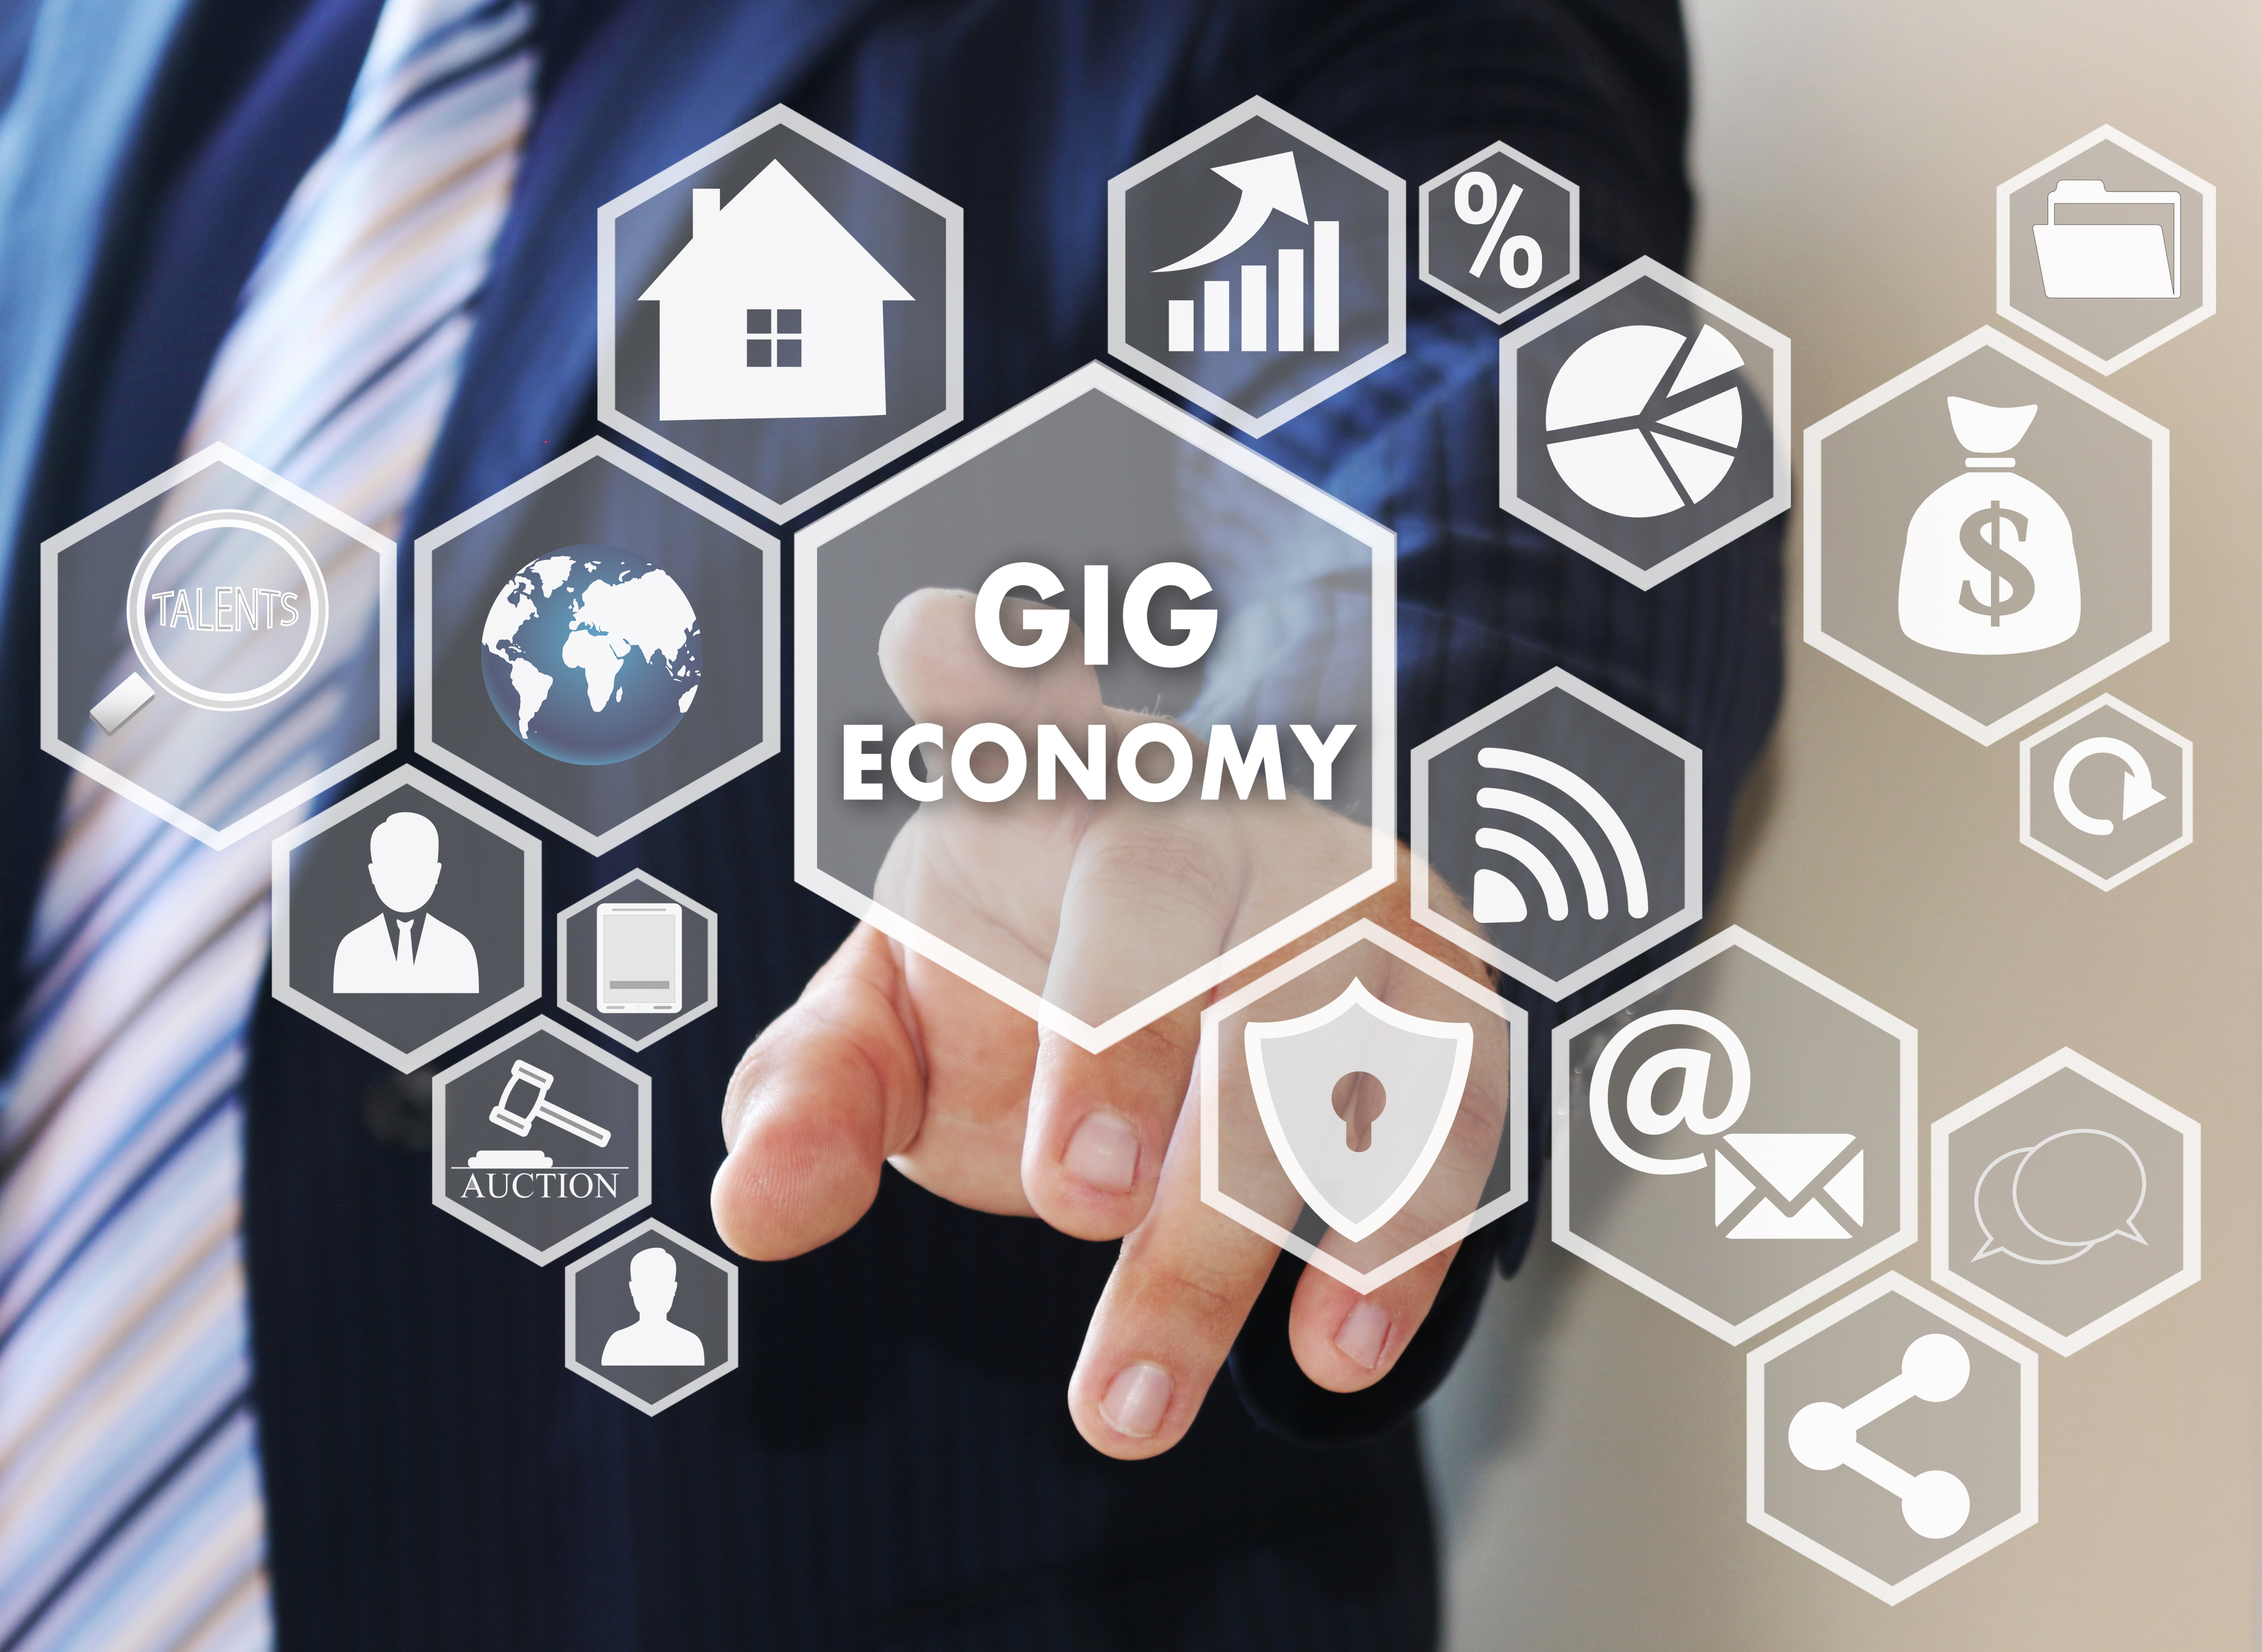 Can you make the 'gig' economy work better for you?